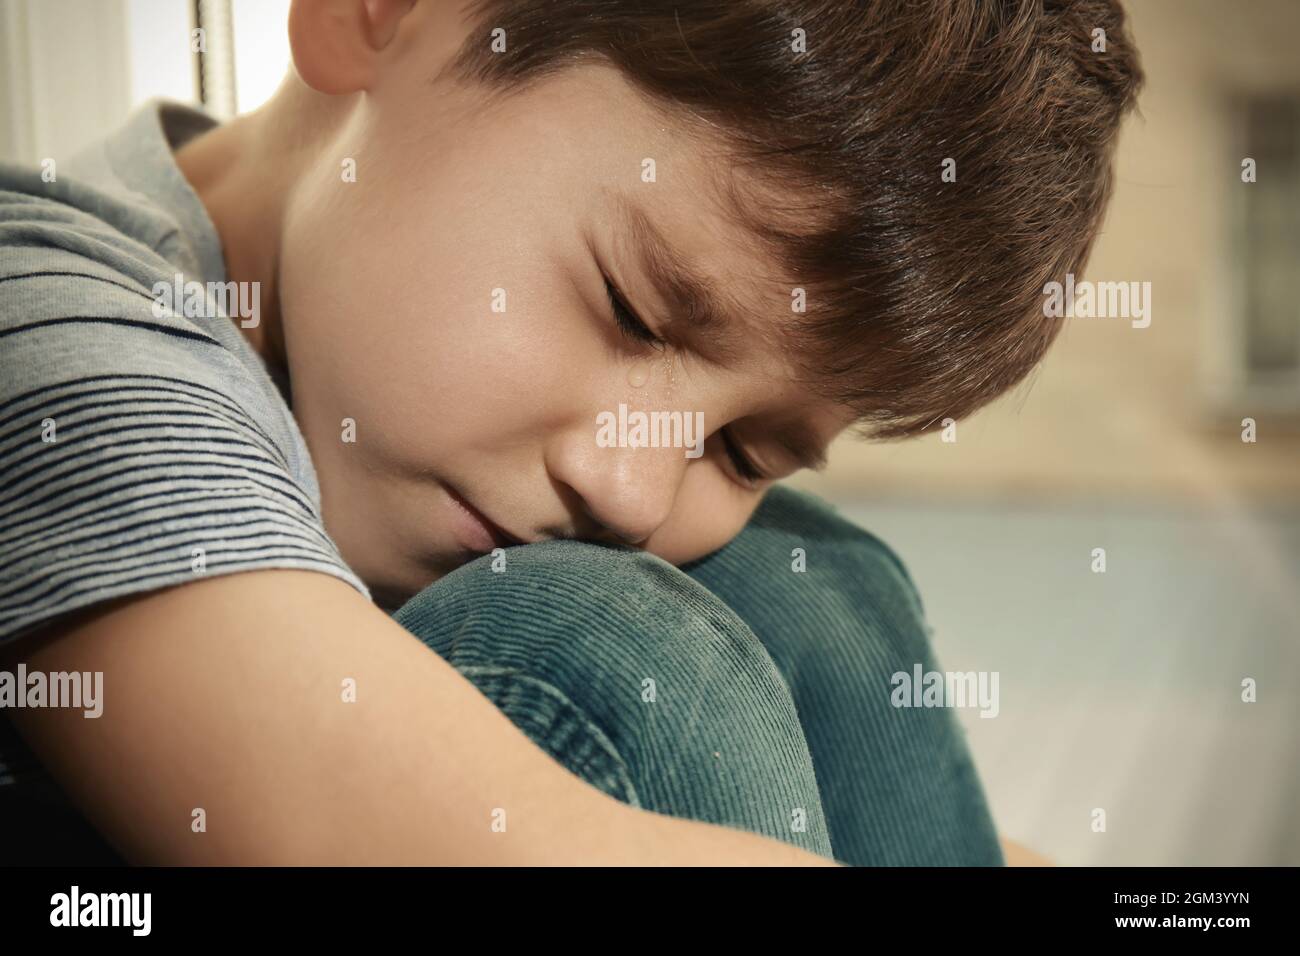 Little sad boy crying. Abuse of children concept Stock Photo - Alamy